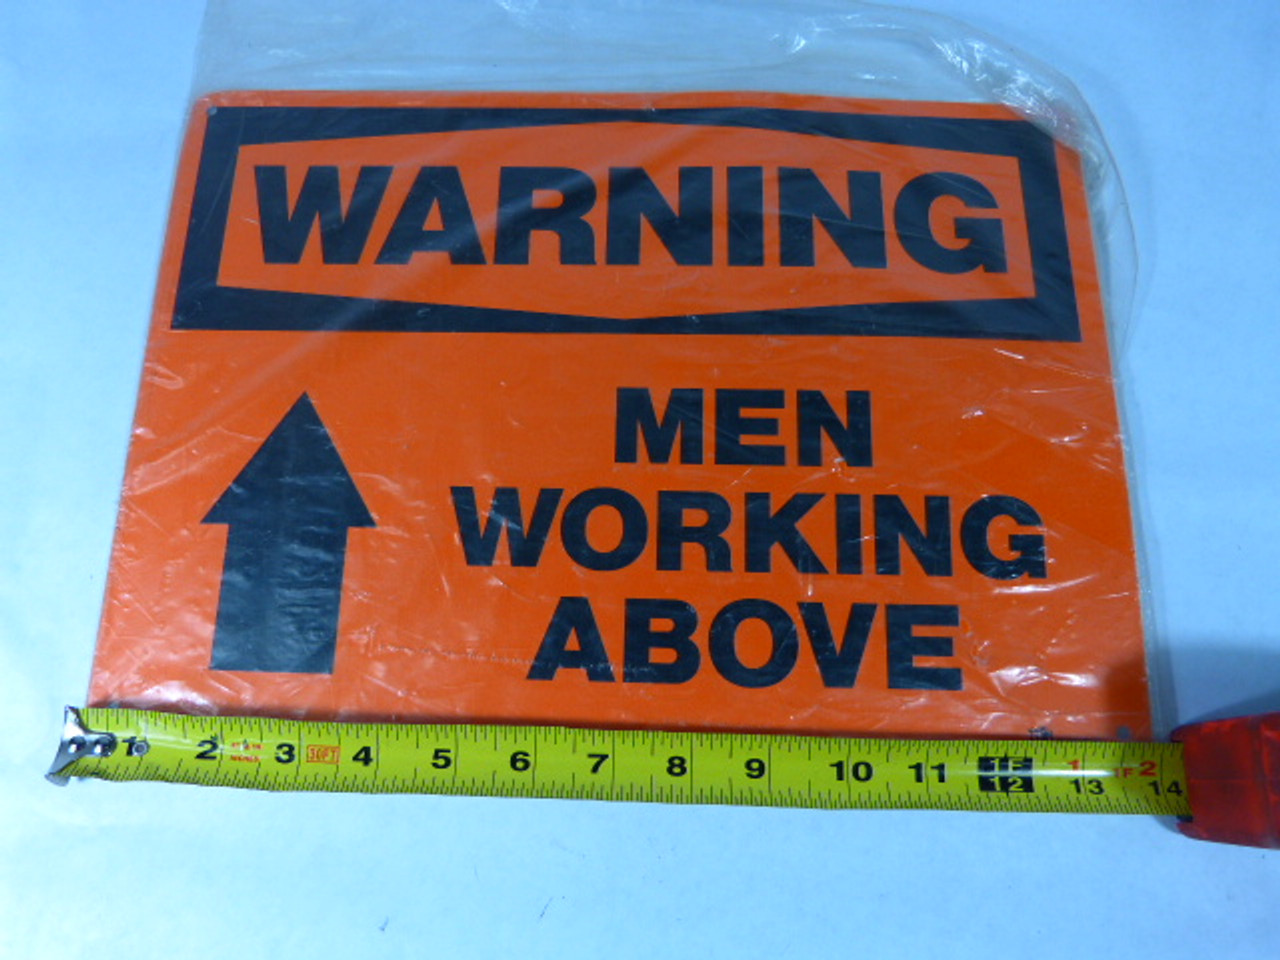 Generic 14"X10" Warning Men Working Above 14" By 10" ! NWB !